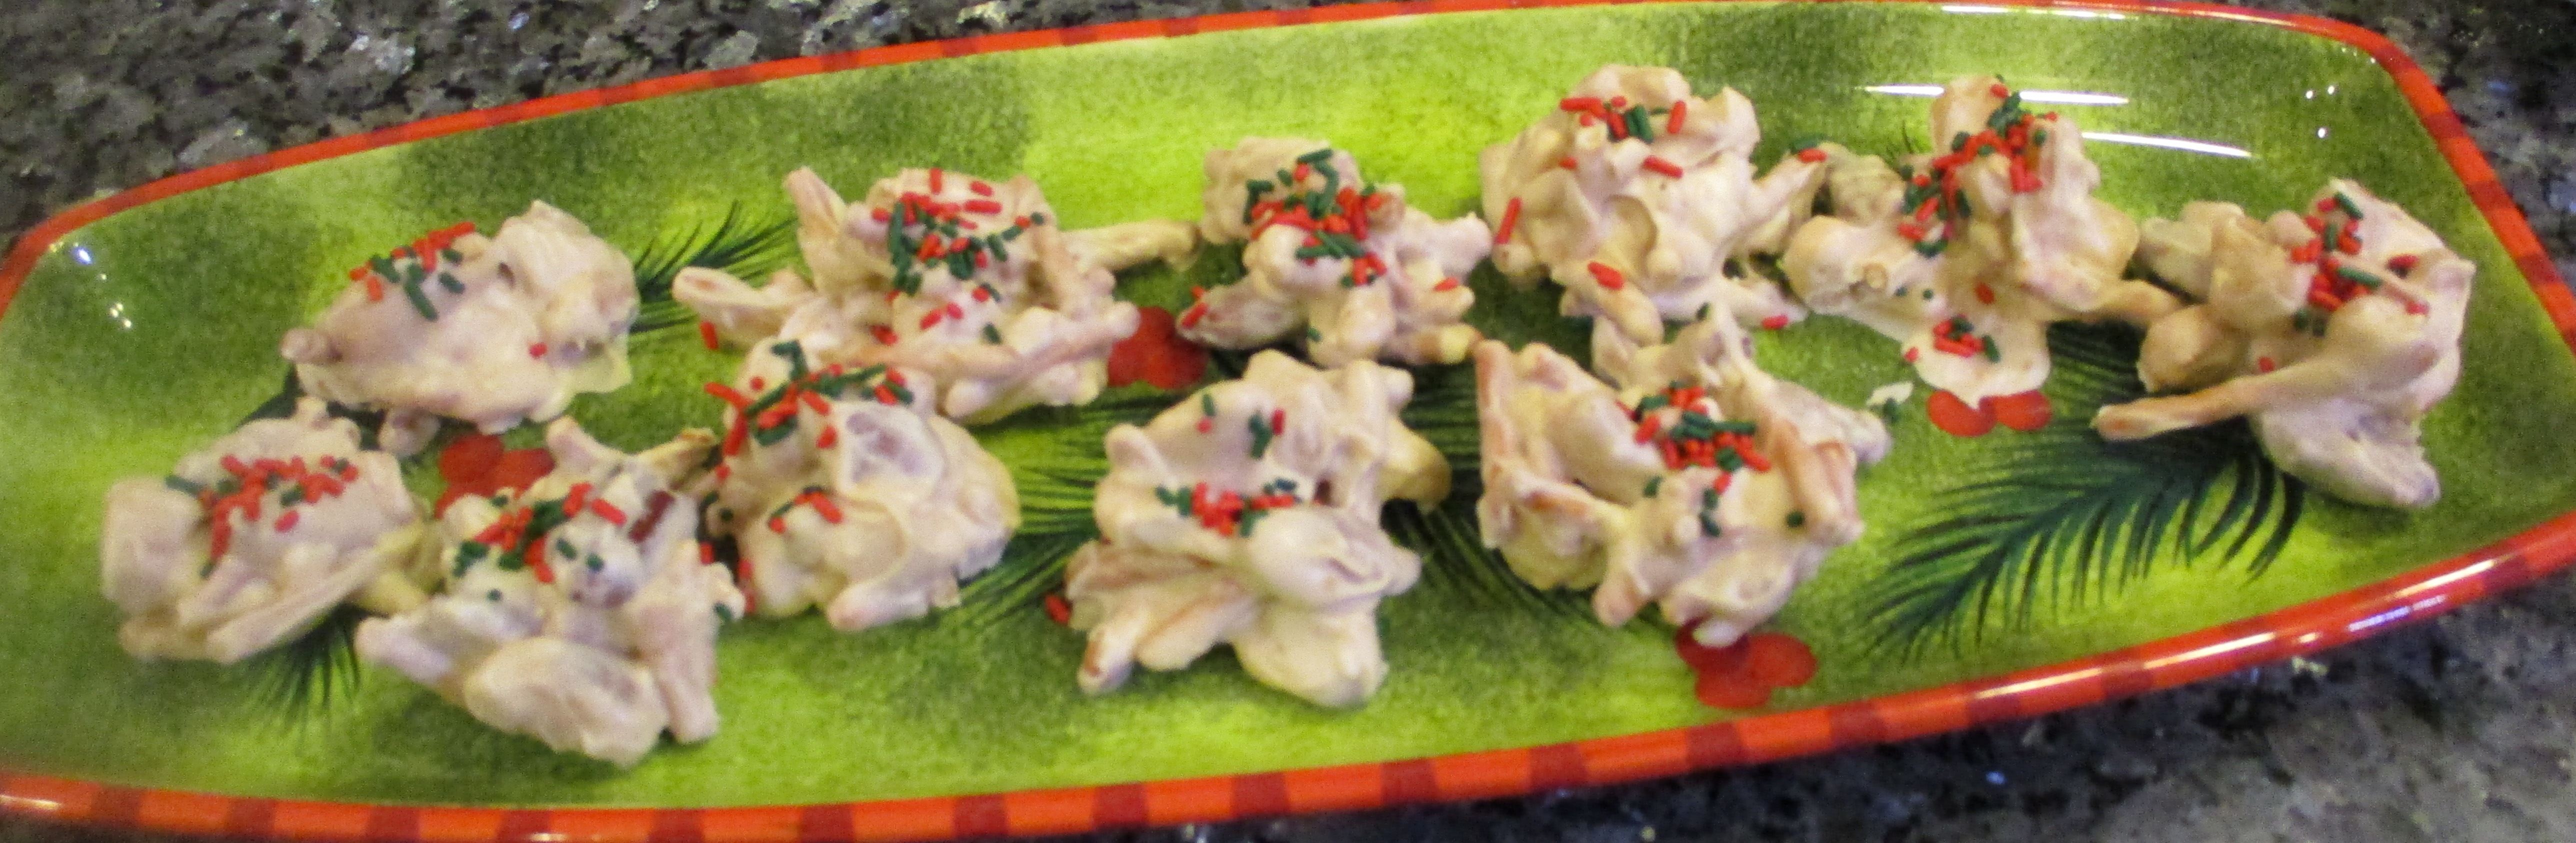 Slow Cooker Christmas Clusters Recipe